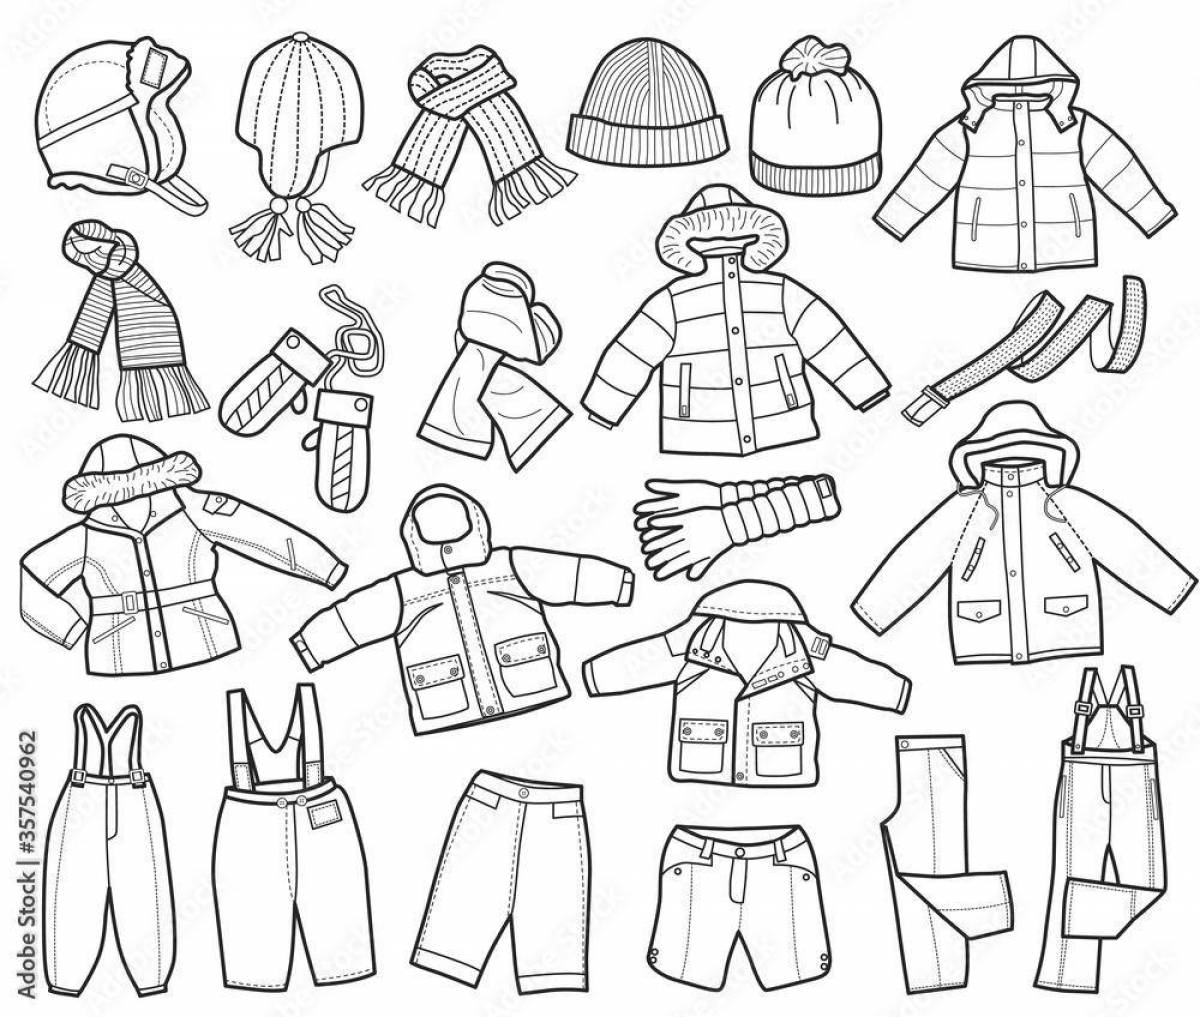 Playful winter clothes coloring page for kids